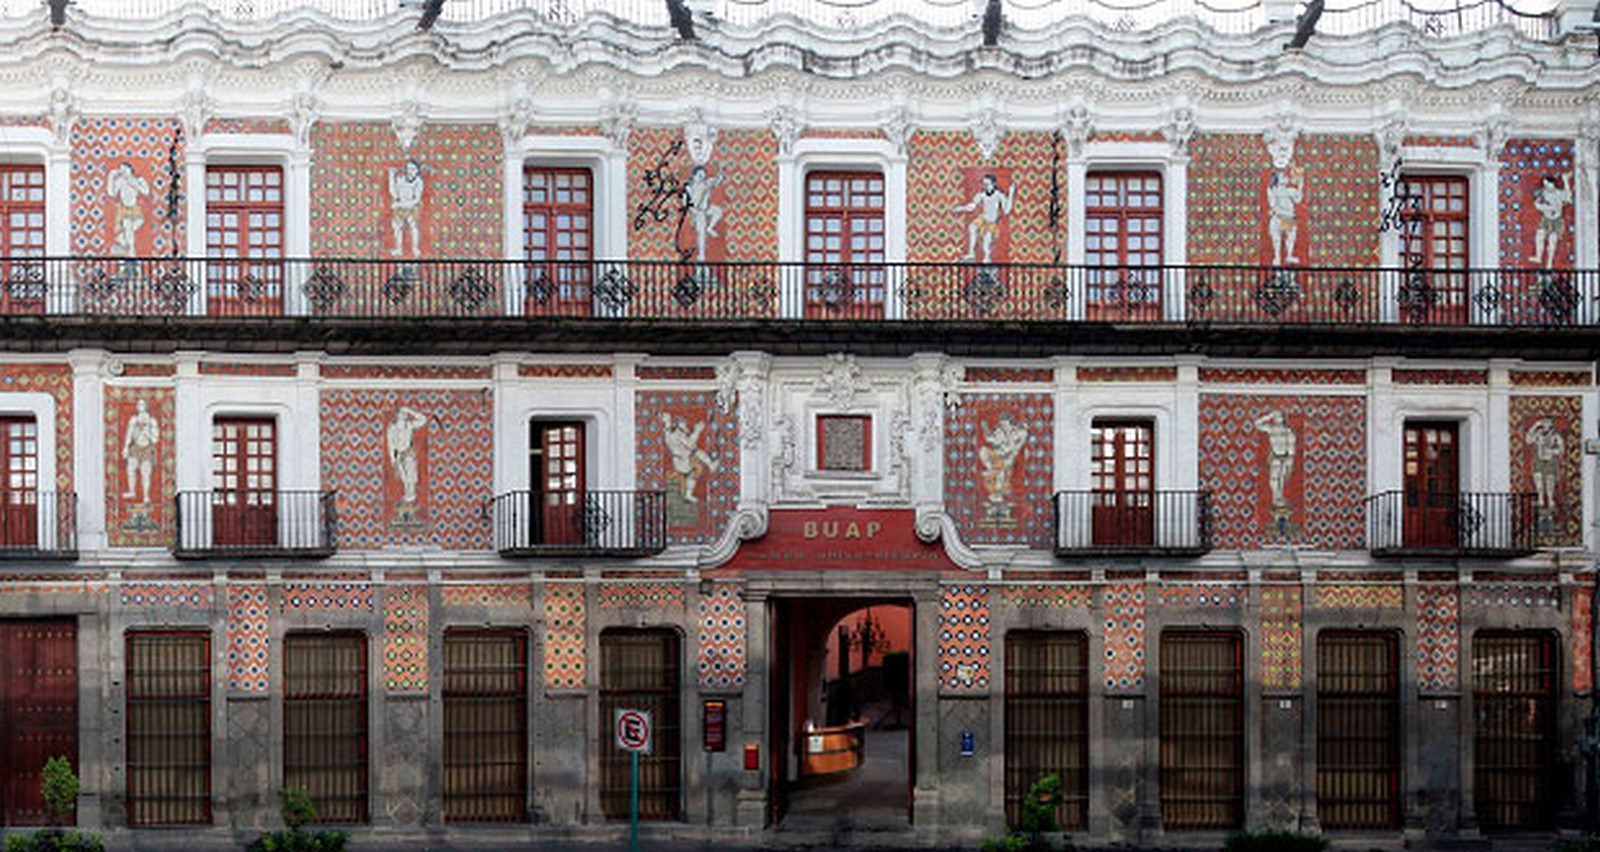 15 Places to visit in Puebla City for the Travelling Architect - Sheet2